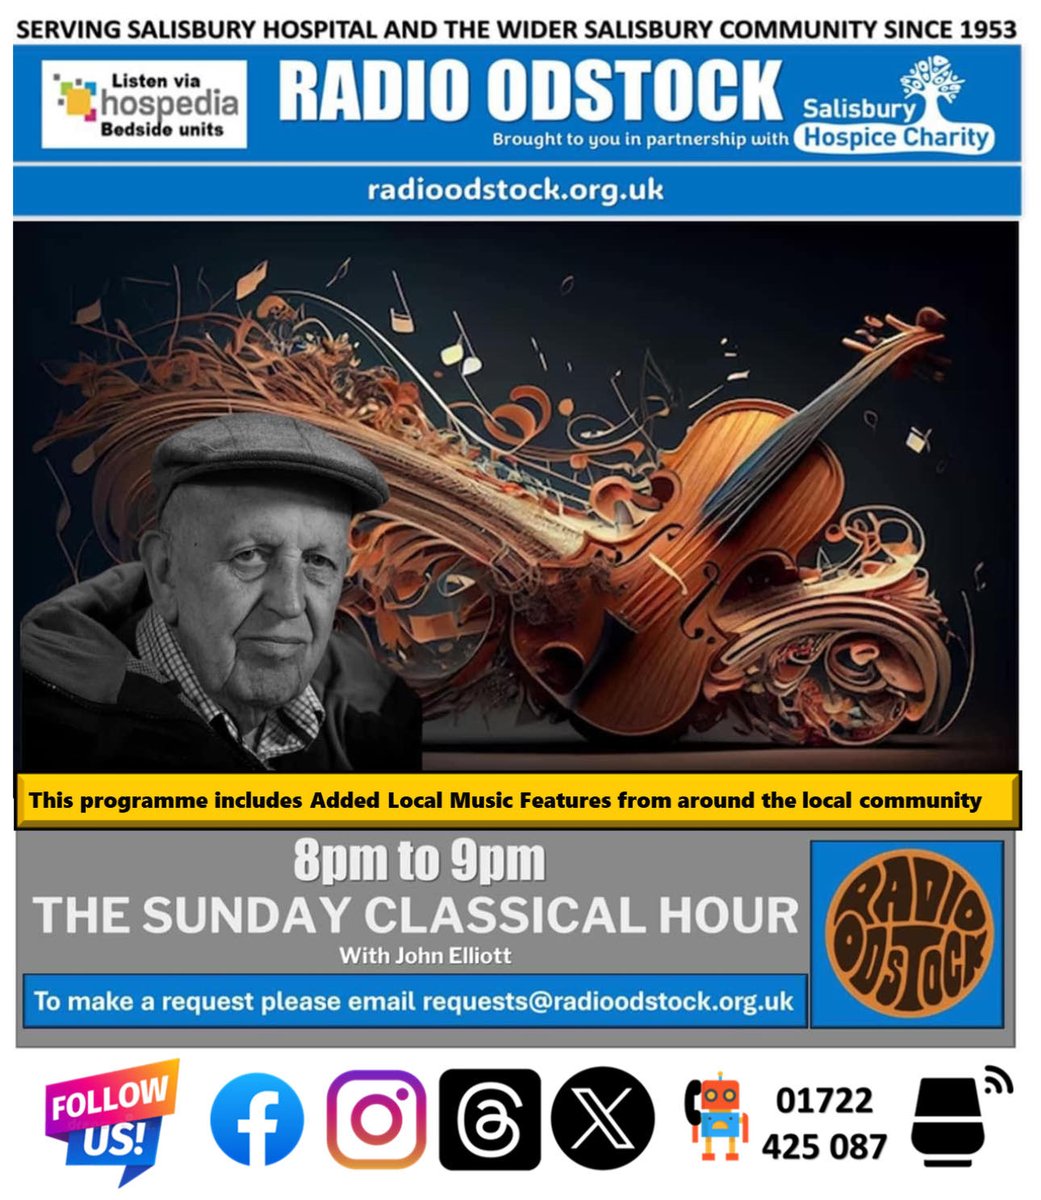 John Elliott is here at 8pm with his Classical Show which includes a Local Music Feature showcasing the fantastic talent we have in the Salisbury area.
Listen from 8pm at radioodstock.org.uk
#salisbury #classicalmusic #choralmusic